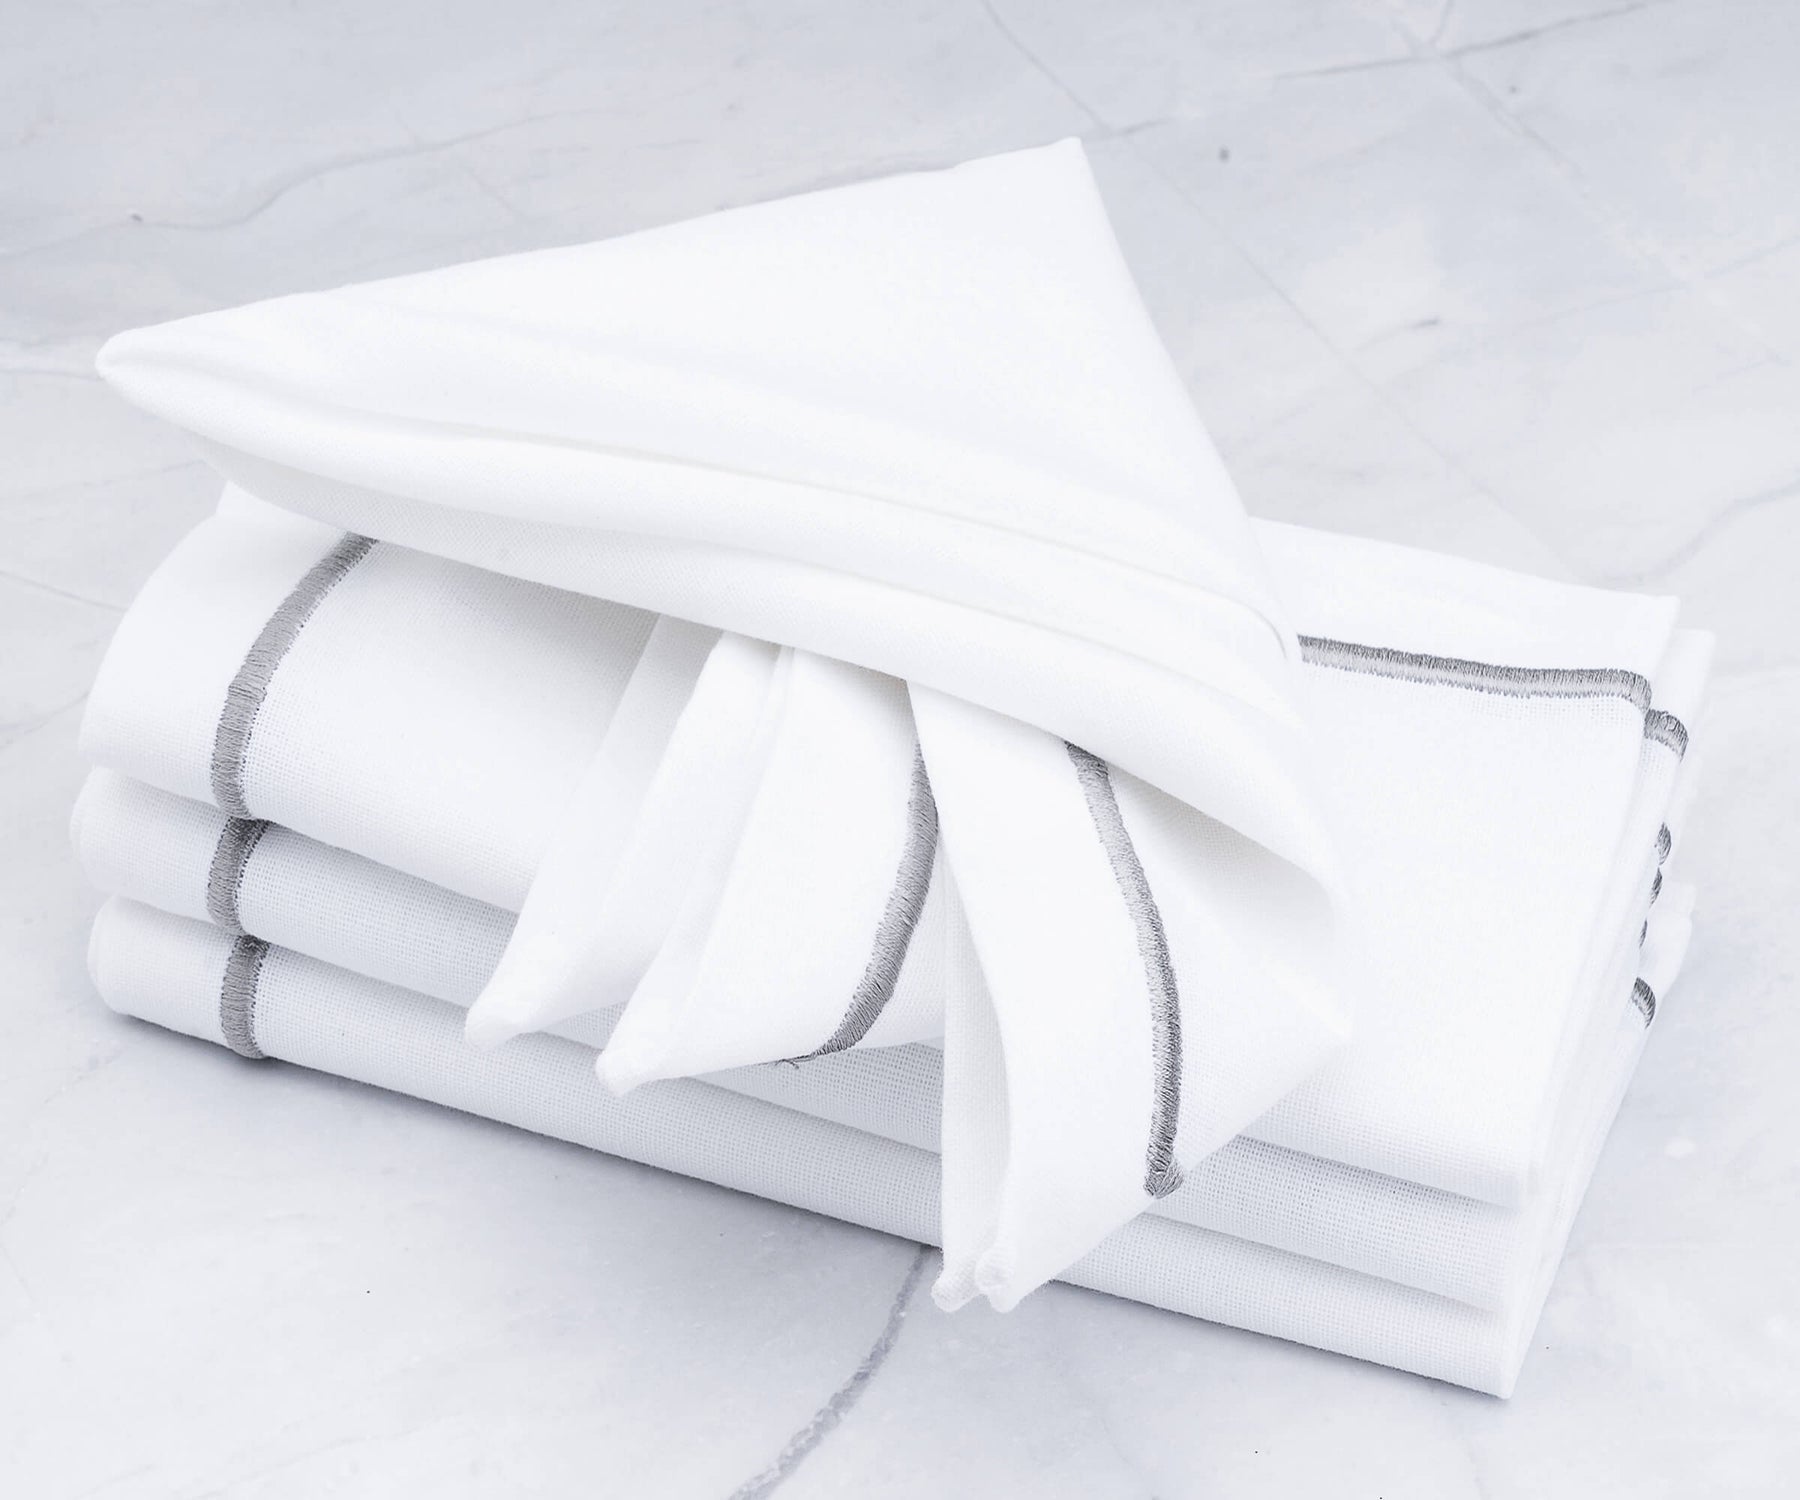 Set your table with soft gray napkins, adding a natural touch.